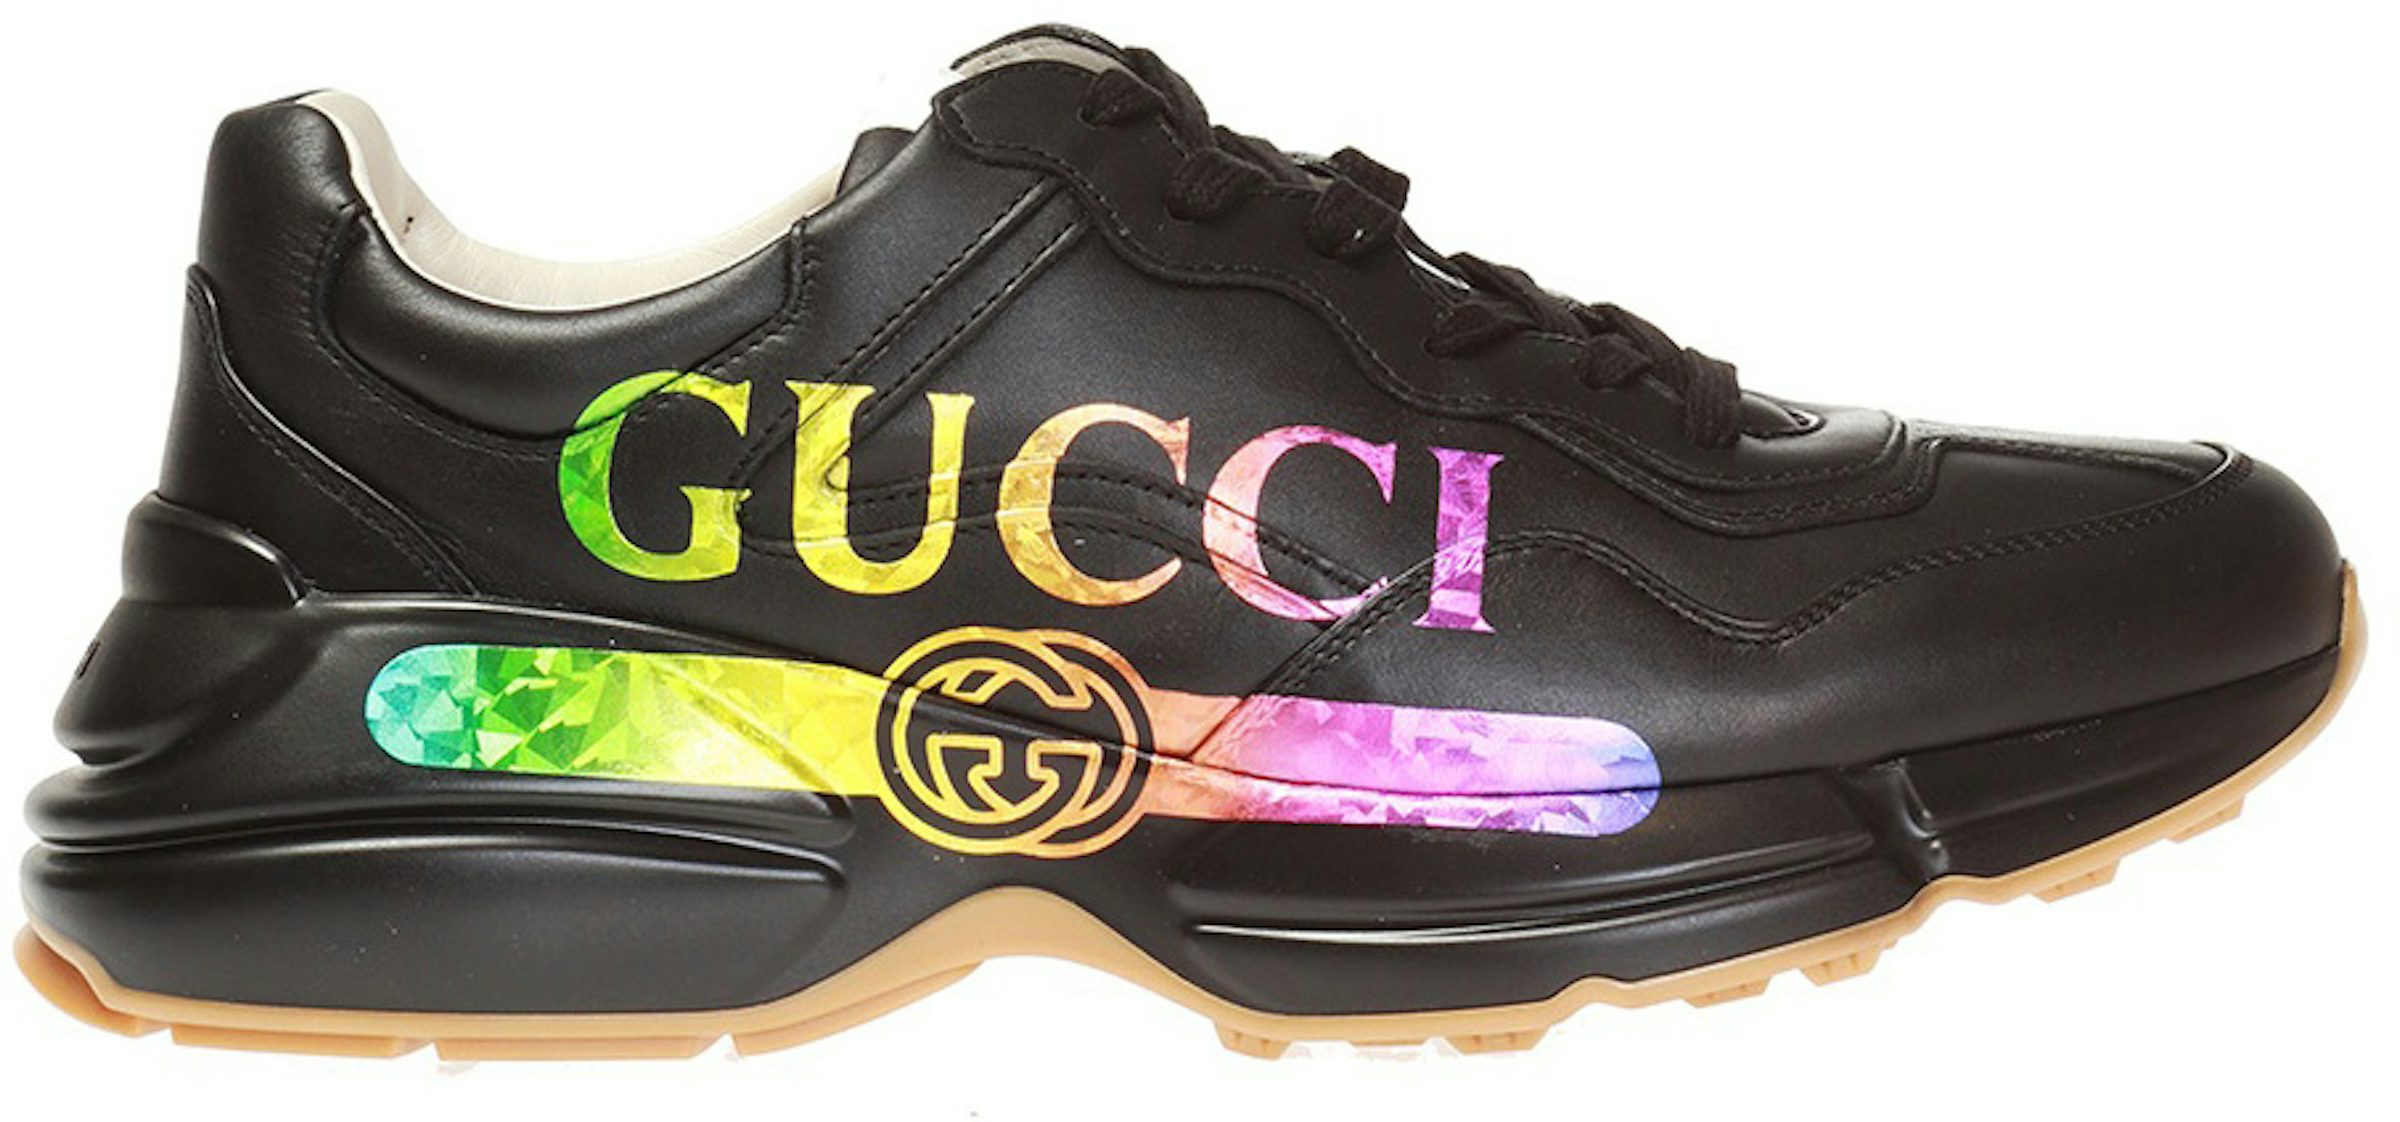 Gucci Rhyton NY Sneakers + Boots Unboxing 